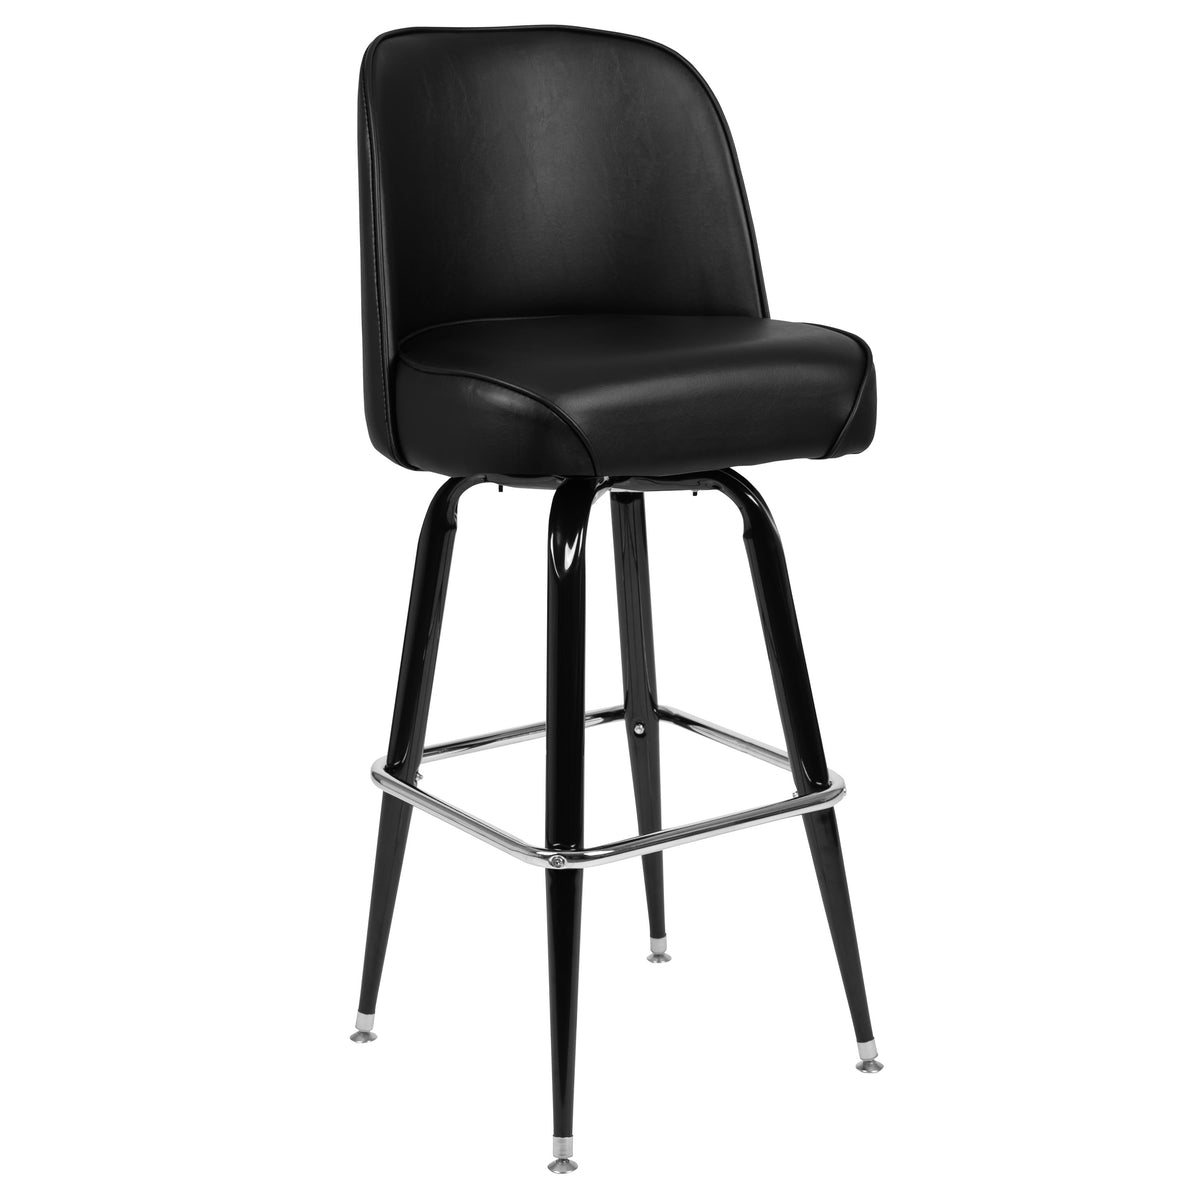 Metal Barstool with Swivel Black Vinyl Upholstered Bucket Seat and Footrest